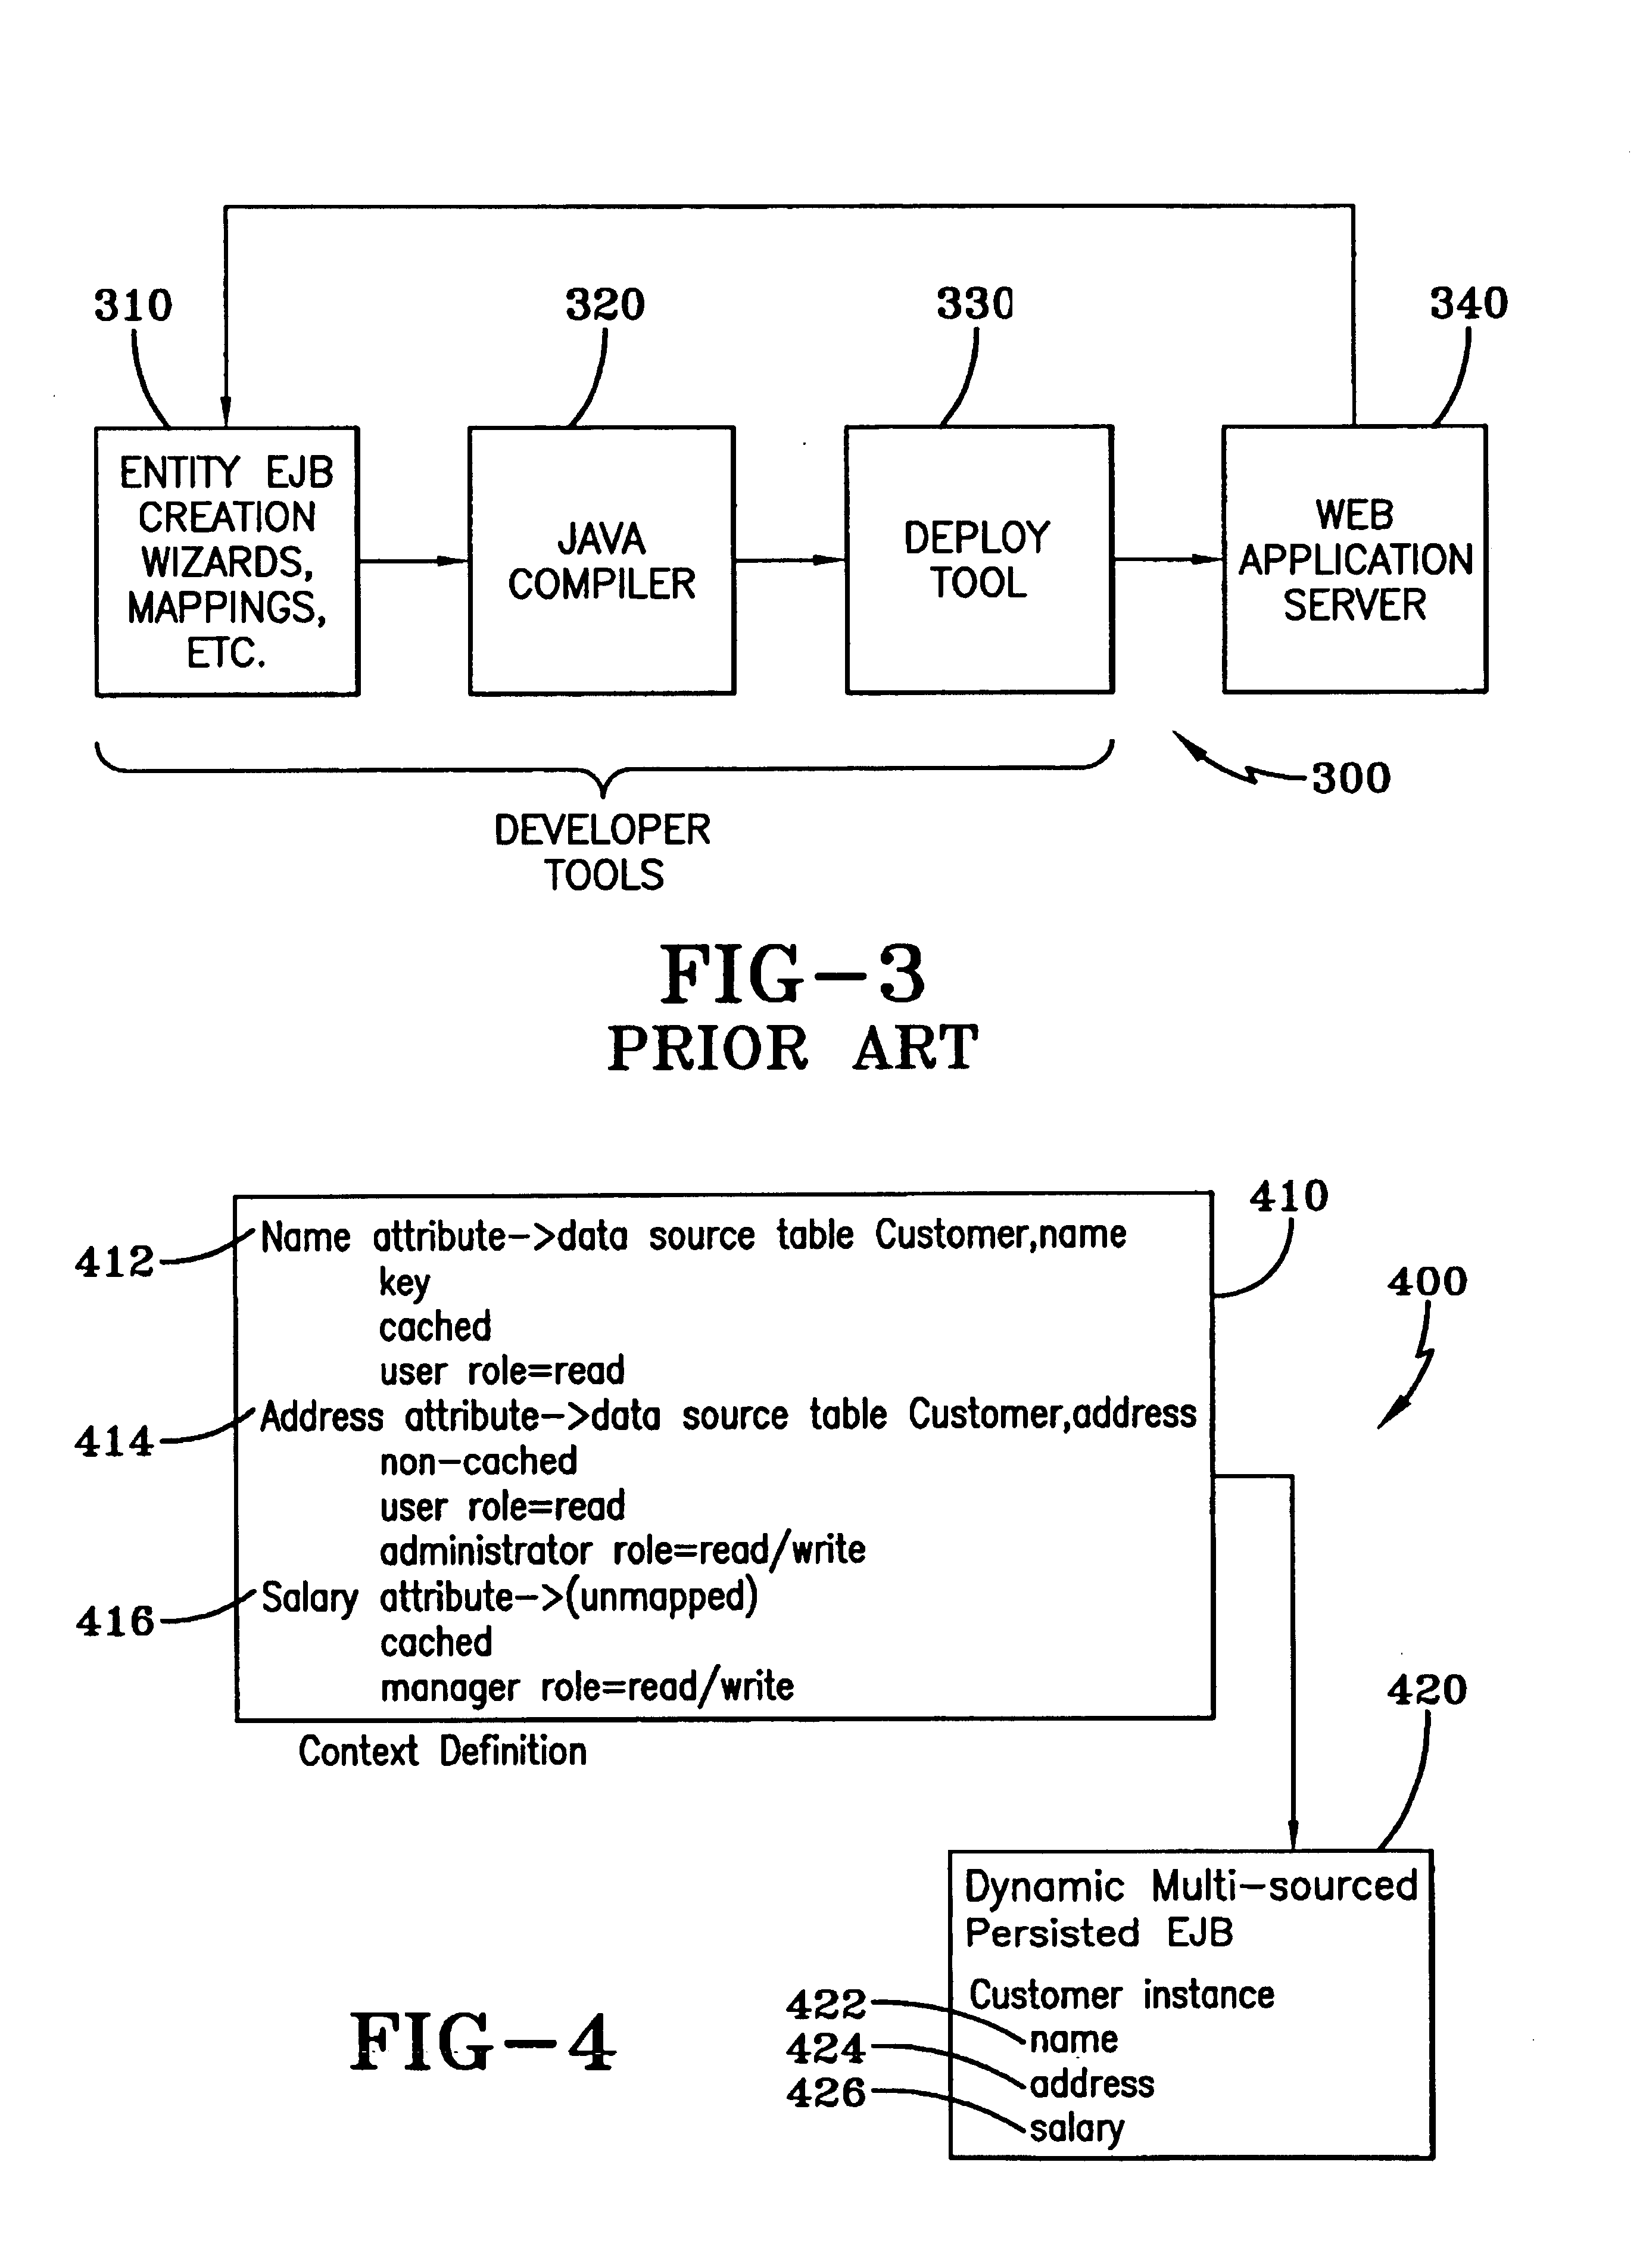 System and method for dynamically securing dynamic-multi-sourced persisted EJBS